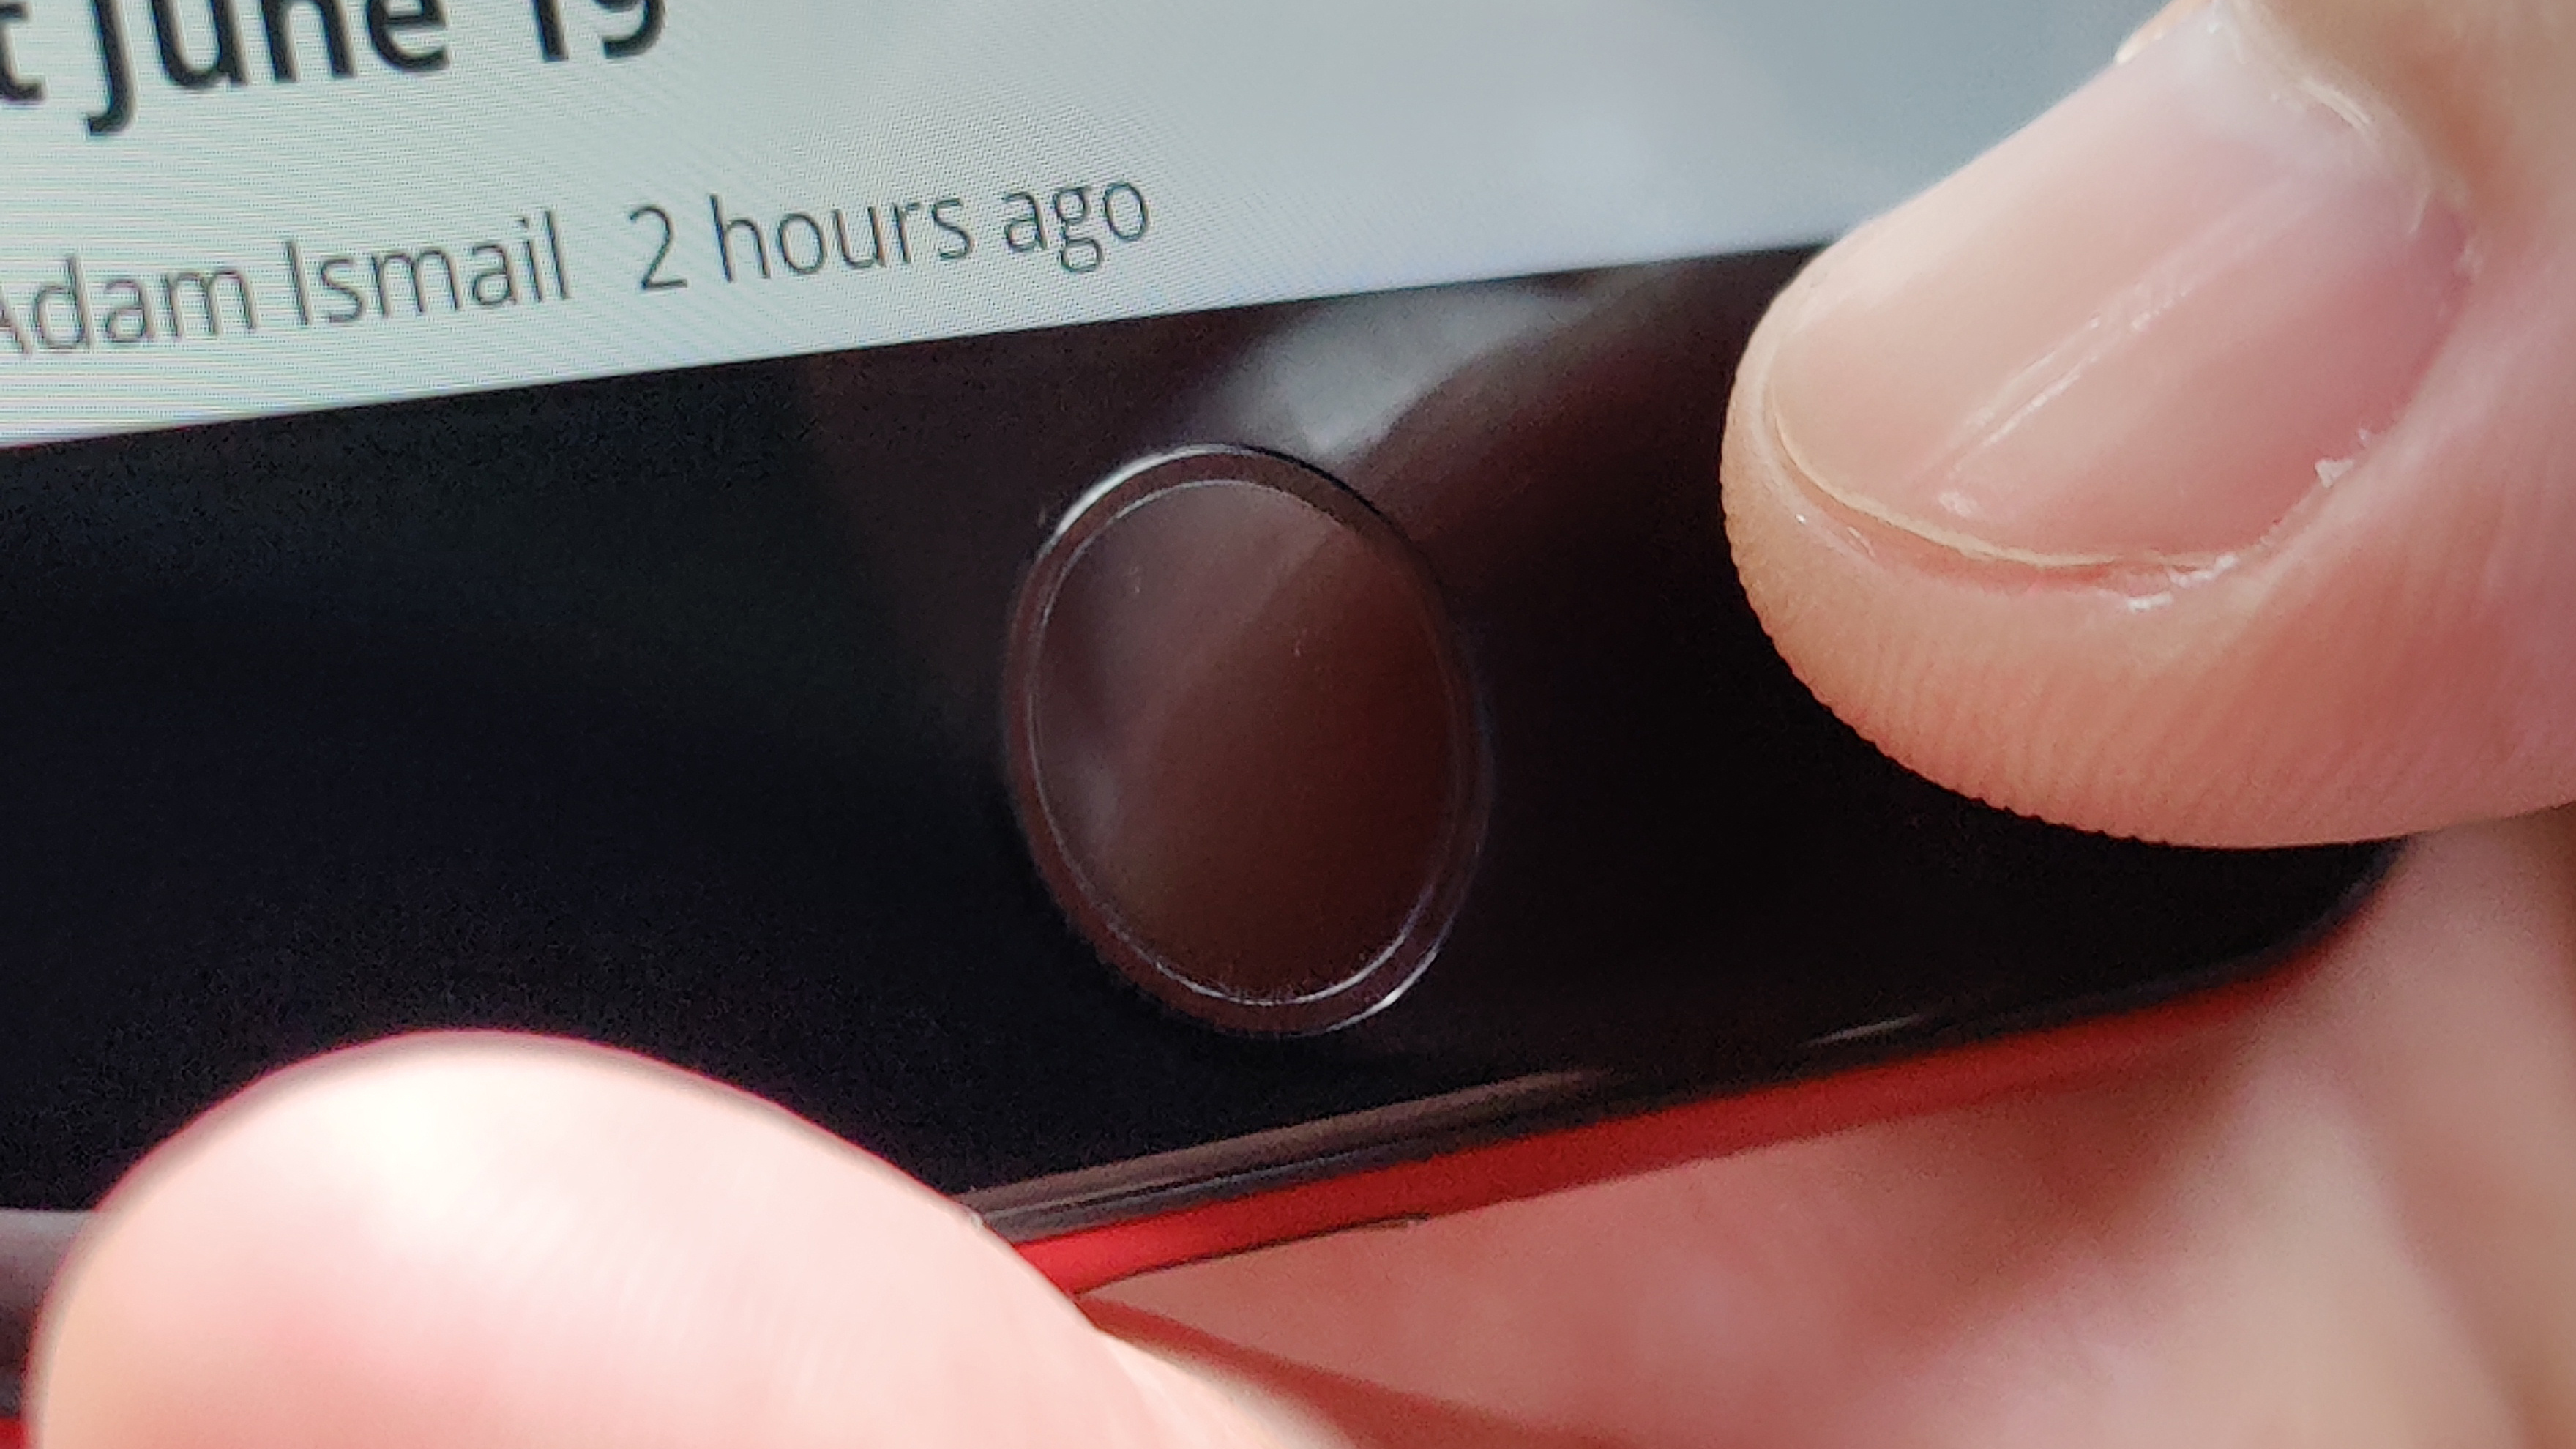 The Touch ID/Home button of the iPhone SE.